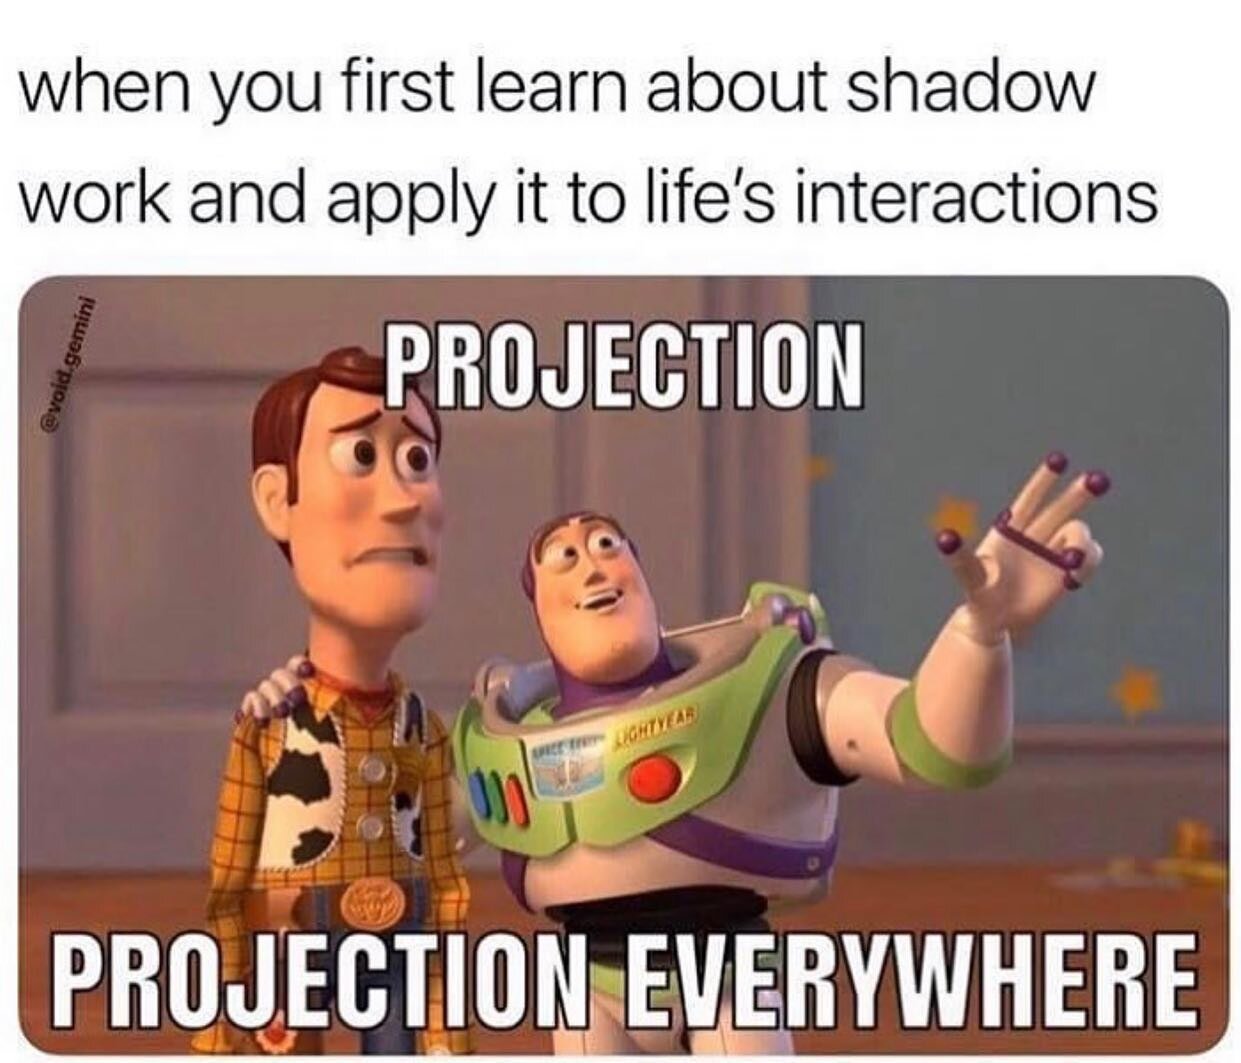 When you&rsquo;re a #shadowworker in training and finally see the truth. 
😂📽😊🤬

#shadowworkers #projections #aimforthelight #spiritualmemes #spiritualjourney #icanseeclearlynow 
#dotheworkgettheresults #spiritualhumor #spiritjunkies #youarethemed